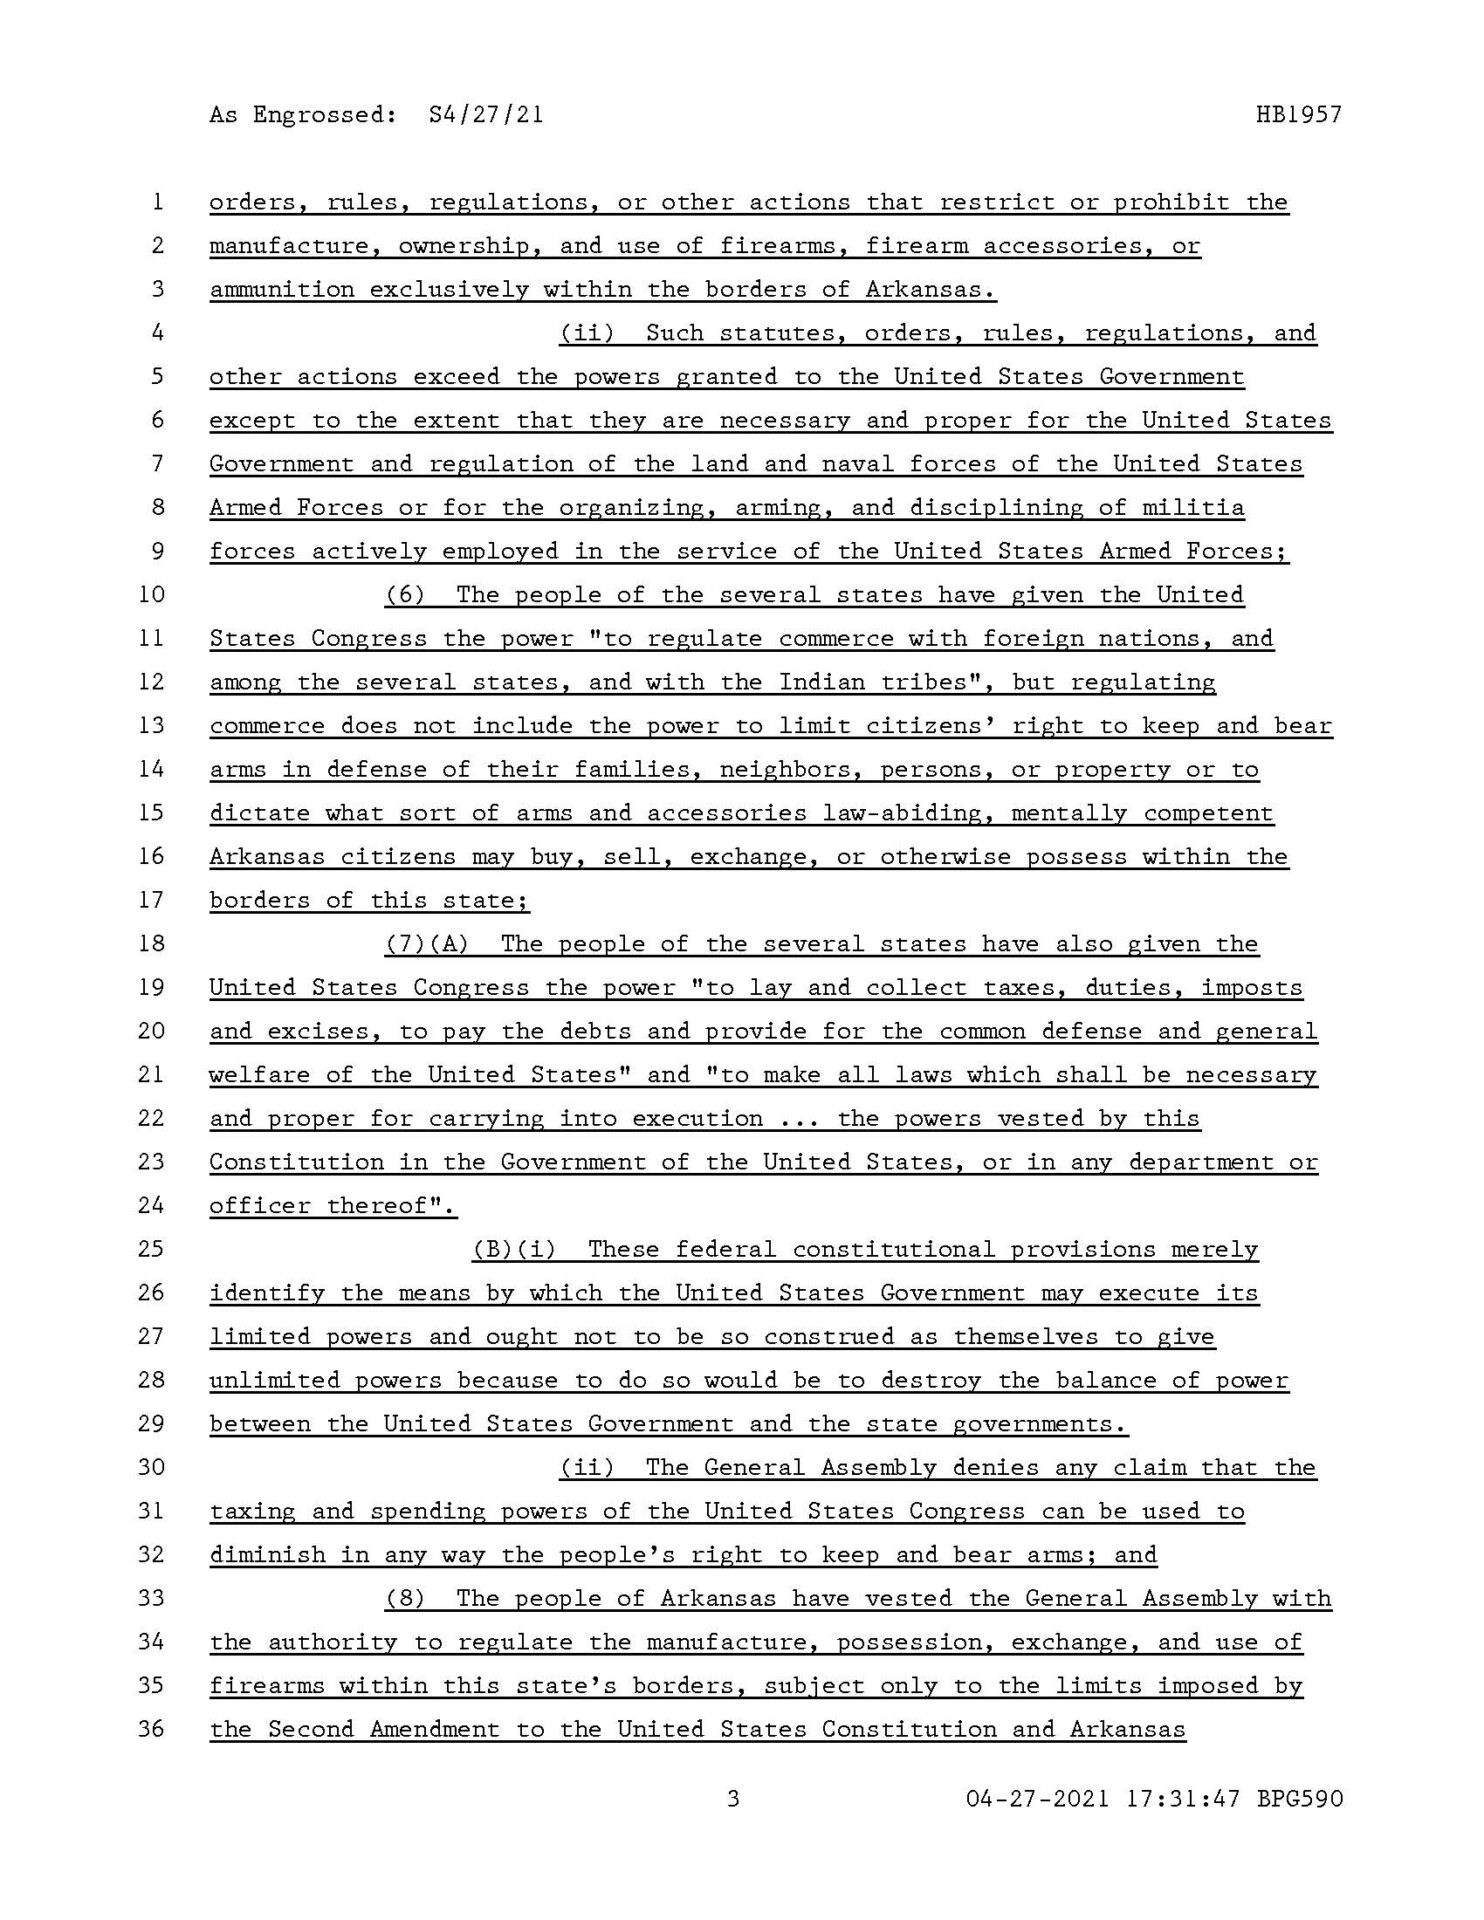 Arkansas Act1012 - CONCERNING THE ENFORCEMENT OF FEDERAL FIREARM BANS WITHIN THE STATE OF ARKANSAS - CONCERNING STATE CONSTITUTIONAL RIGHTS Page 3